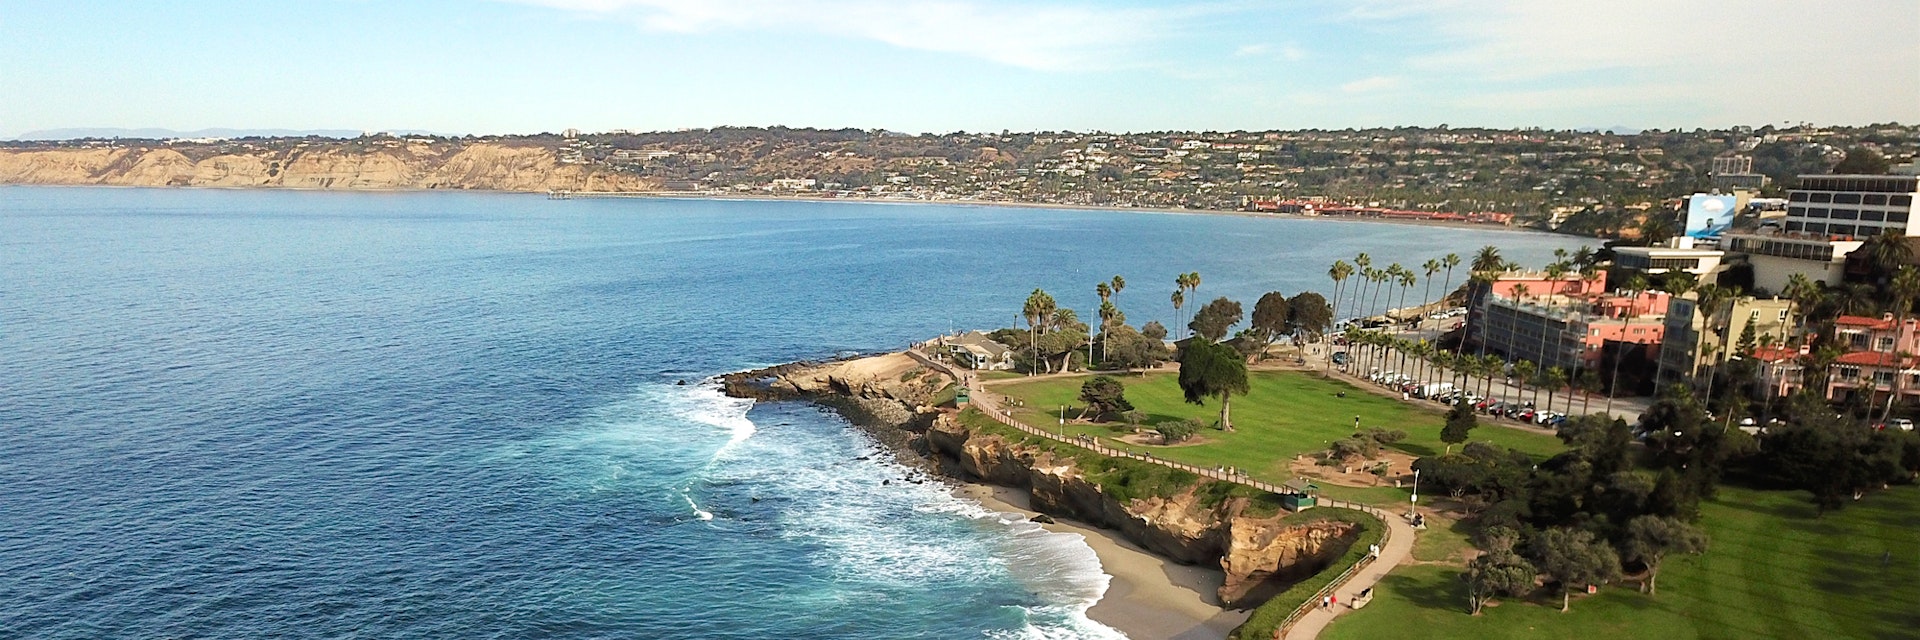 beach & wave, blue and green It is a hilly seaside of curving coastline along the Pacific
974460772
la jolla cove, cliffs, us, water blue, waves water